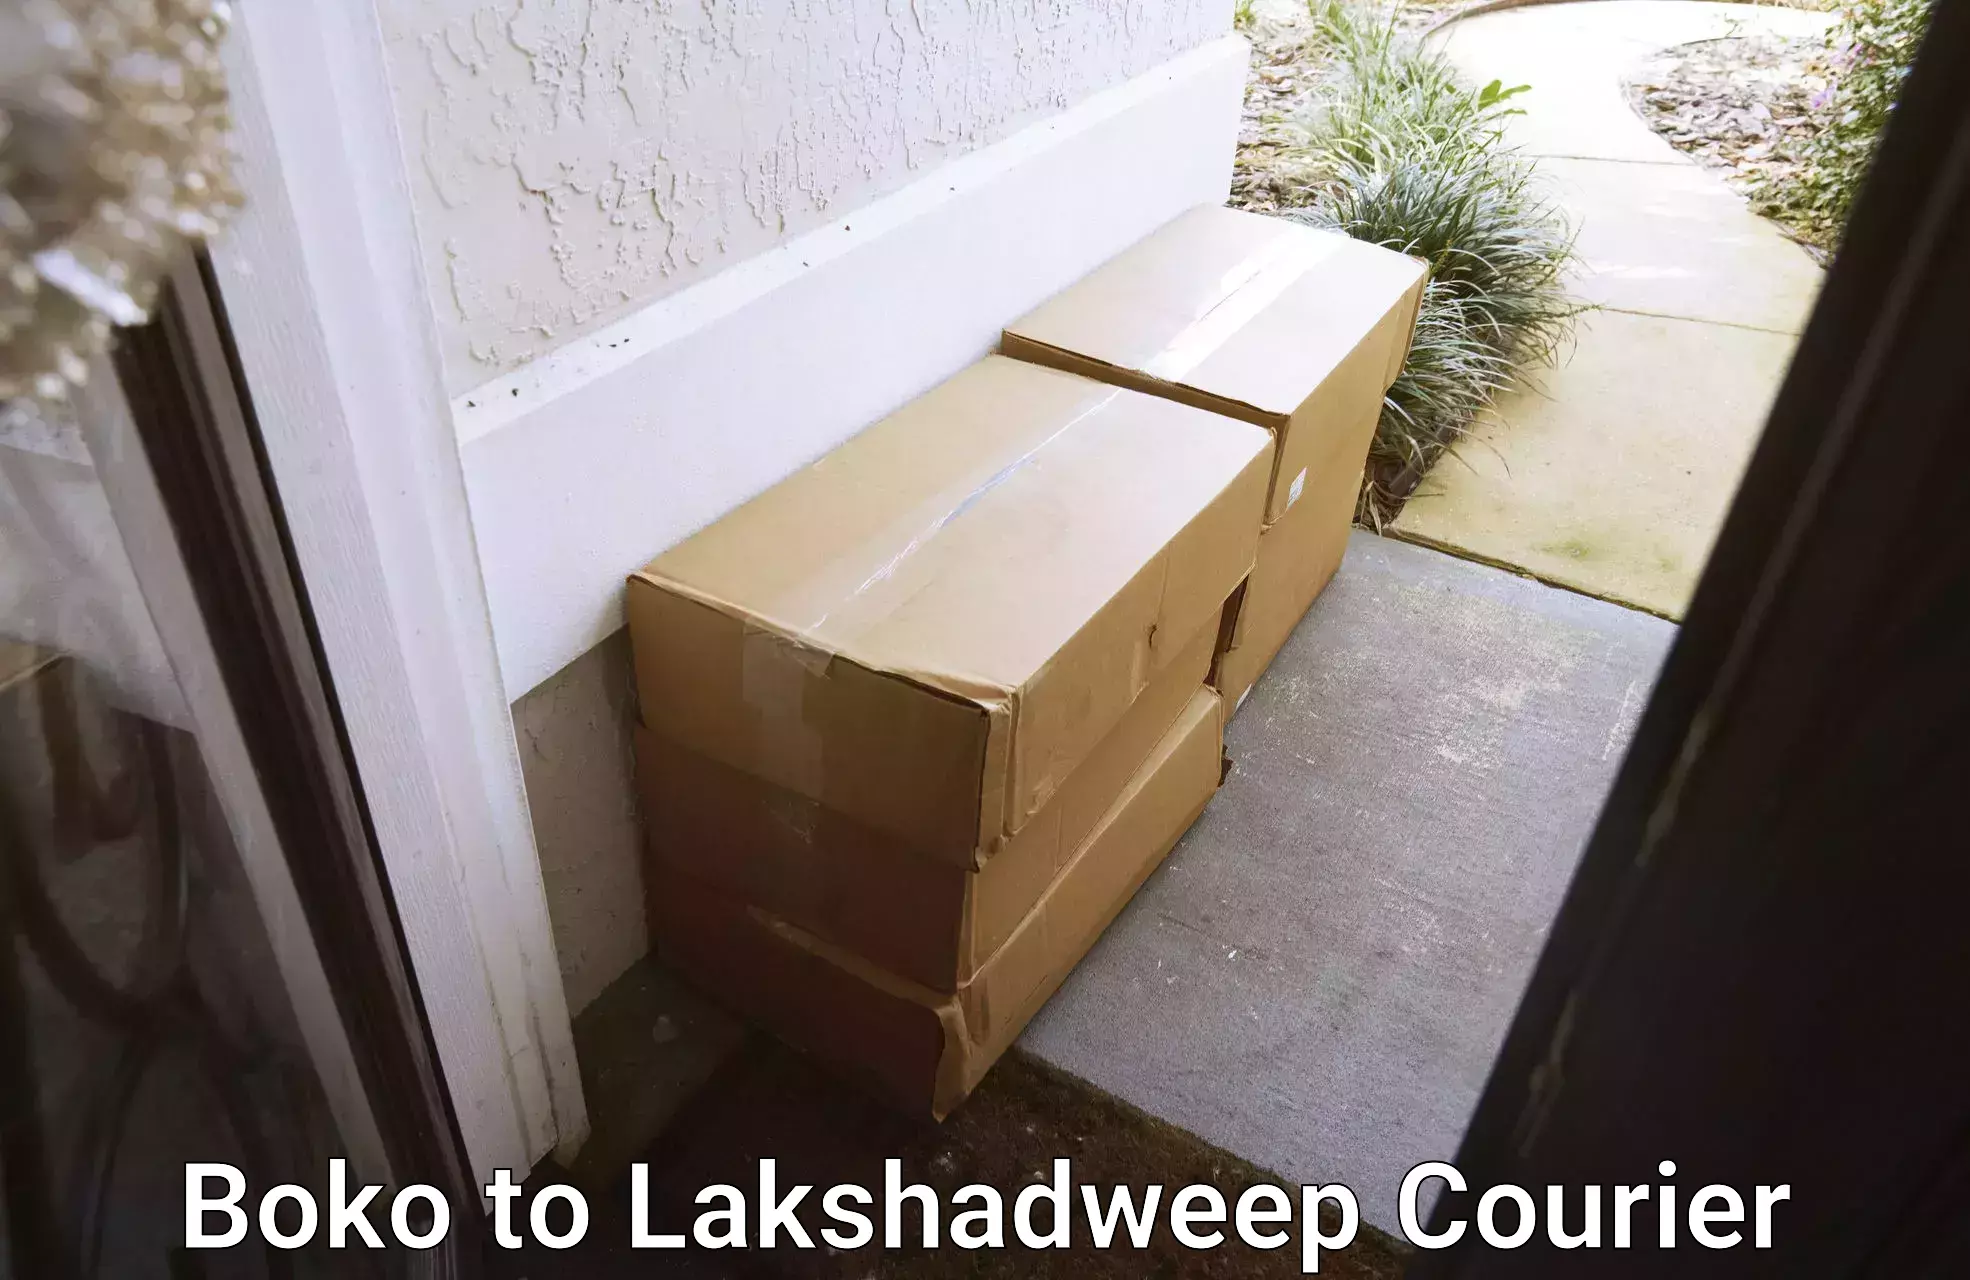 Quality courier services Boko to Lakshadweep